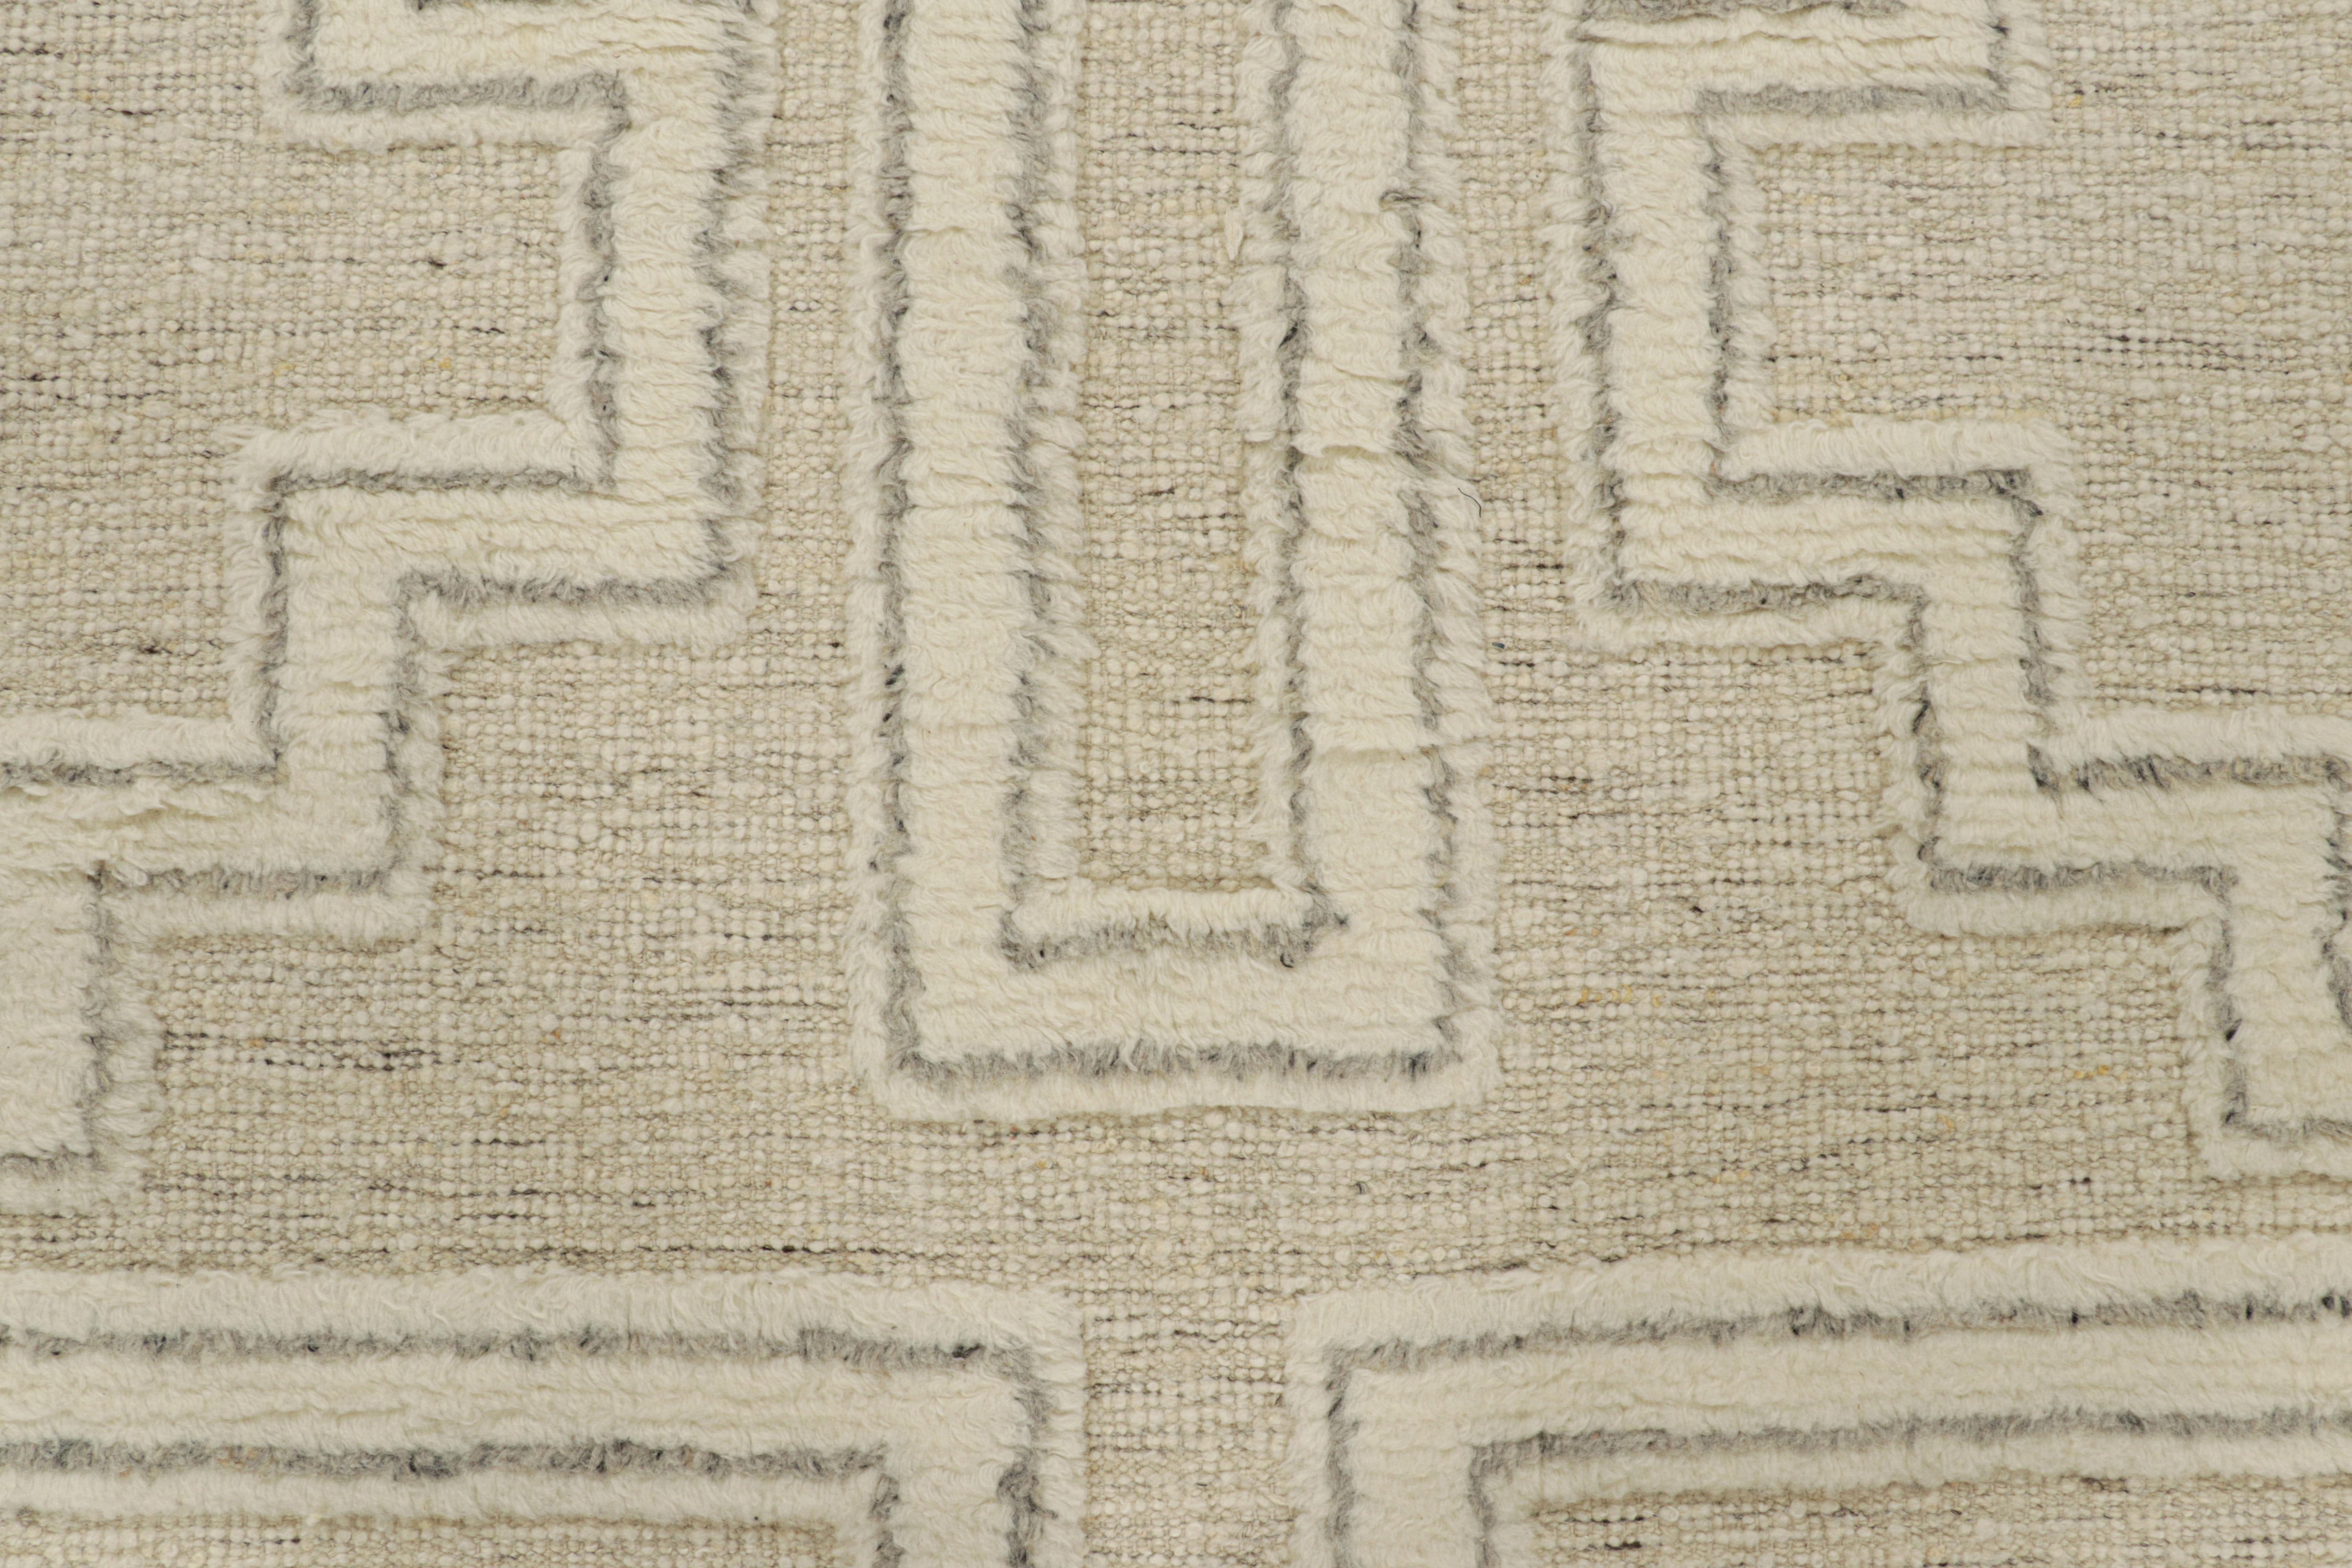 Hand-knotted in wool, this 8x10 smart work both contemporary and textural from India, features variations in color and pile height which lend a fabulous sense of dimension to the geometric patterns in creamy off-white tones. 

On the Design: